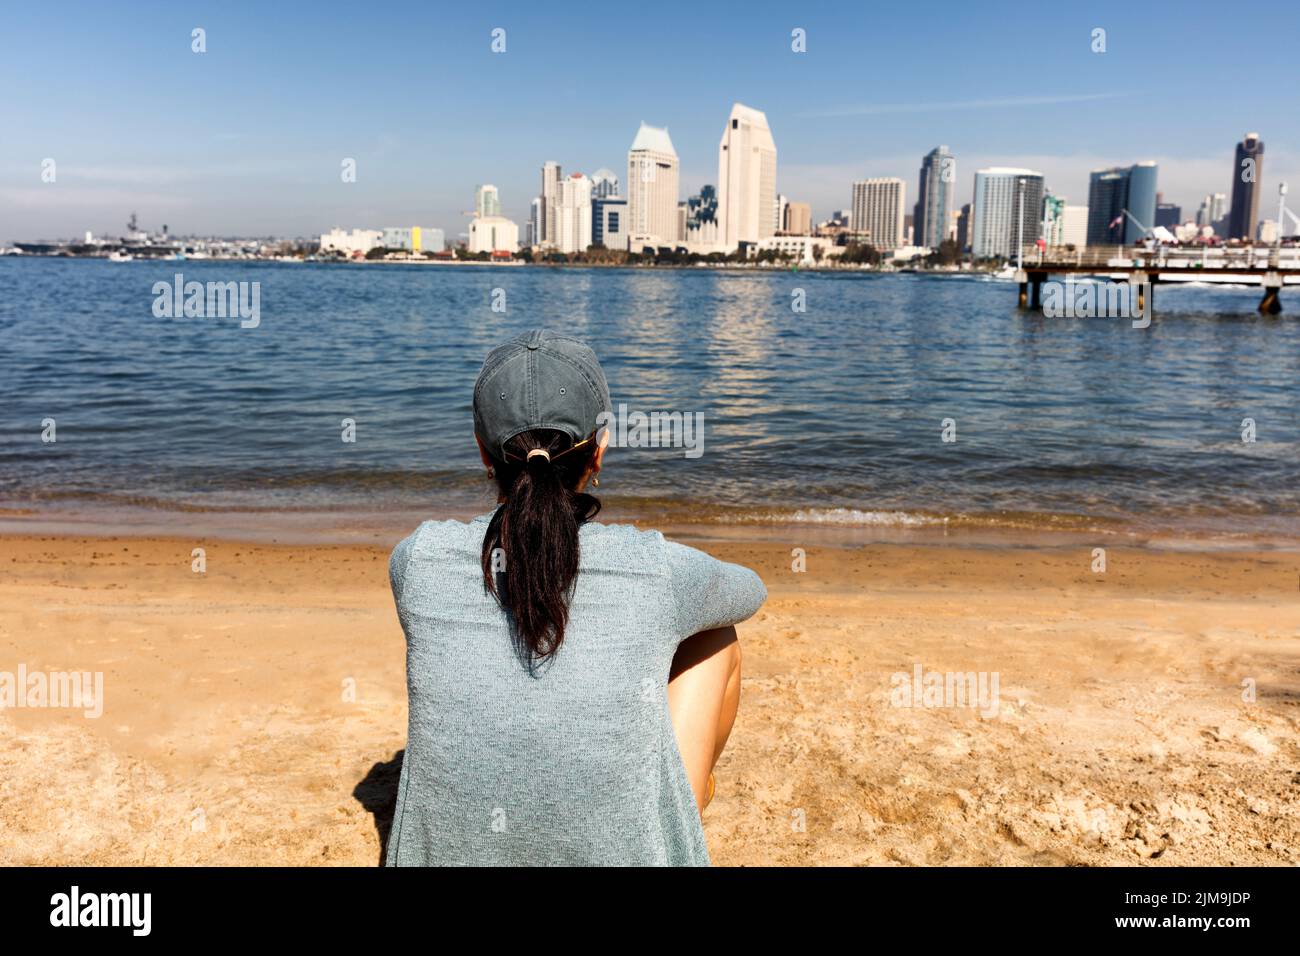 Woman enjoying the view of the San Diego bay and skyline while sitting at beach Stock Photo